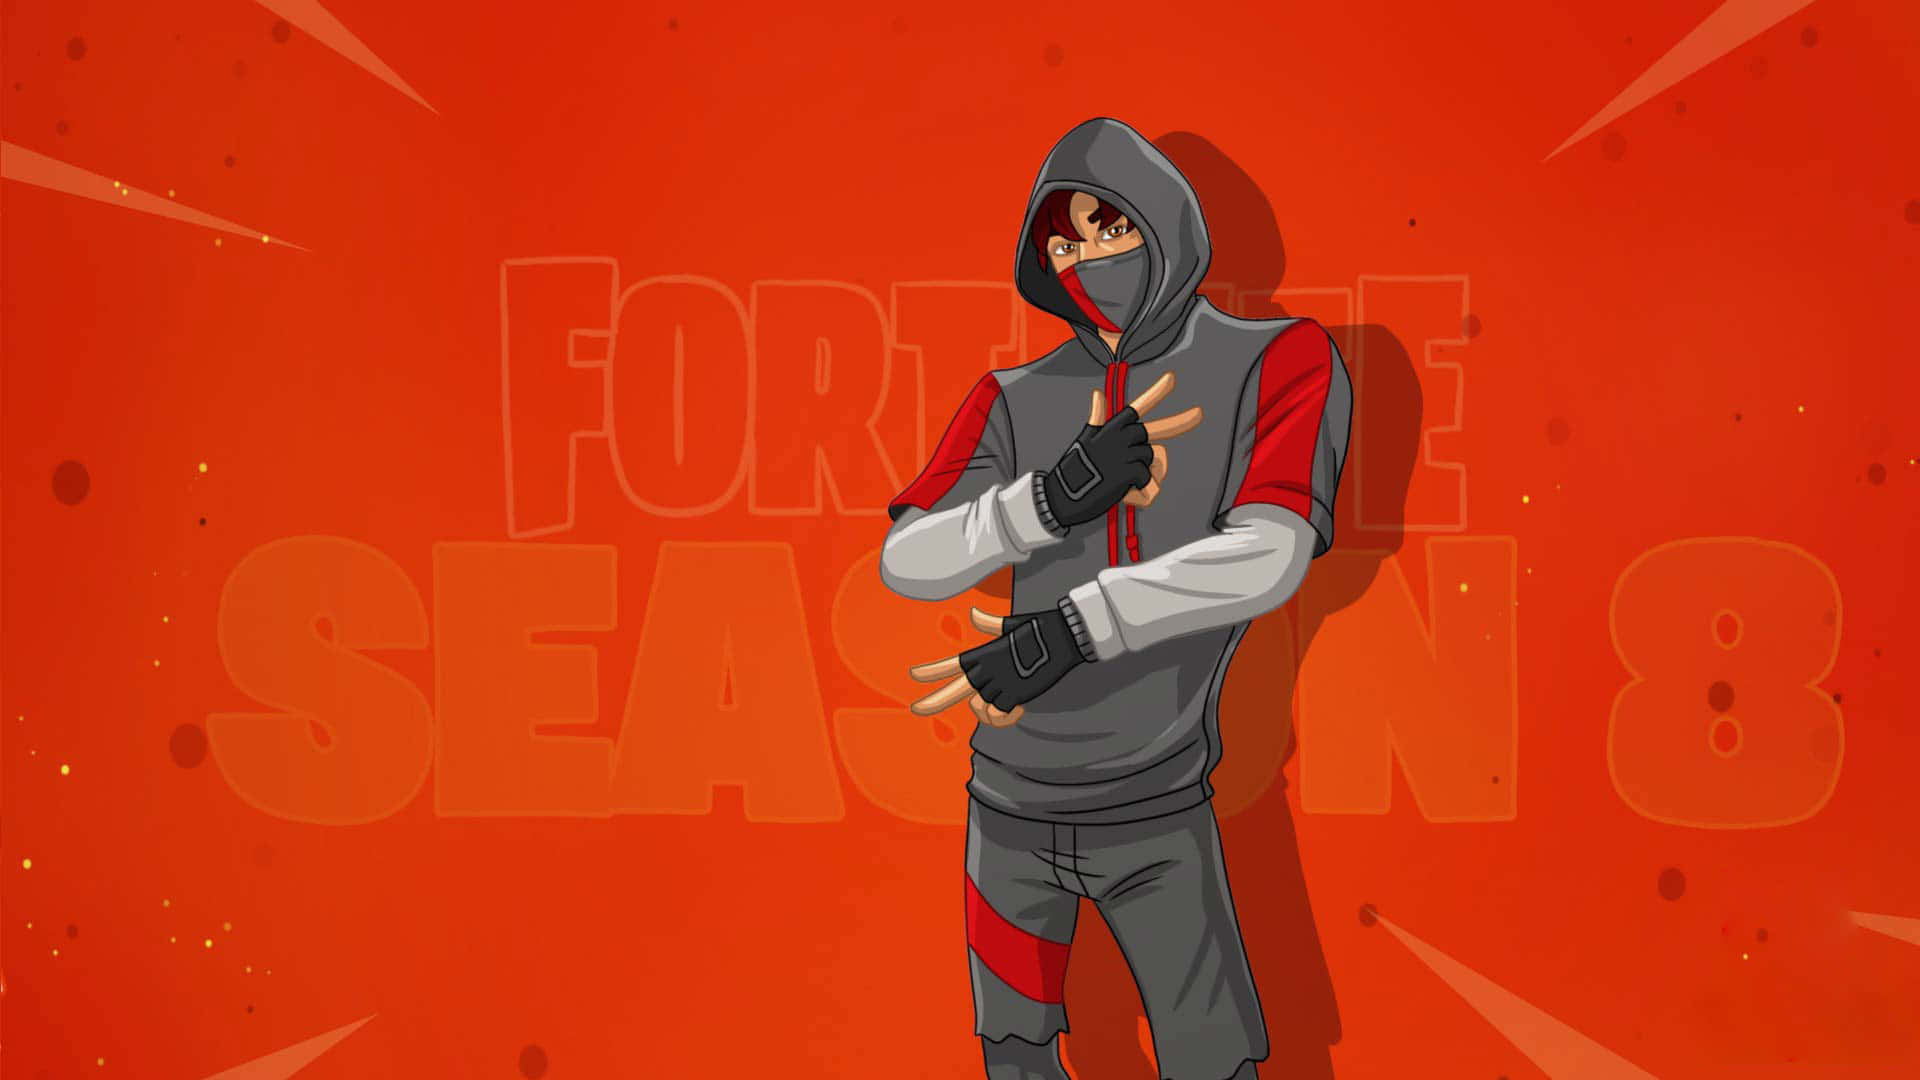 Upgrade your look with the new Fortnite Ikonik Skin Wallpaper